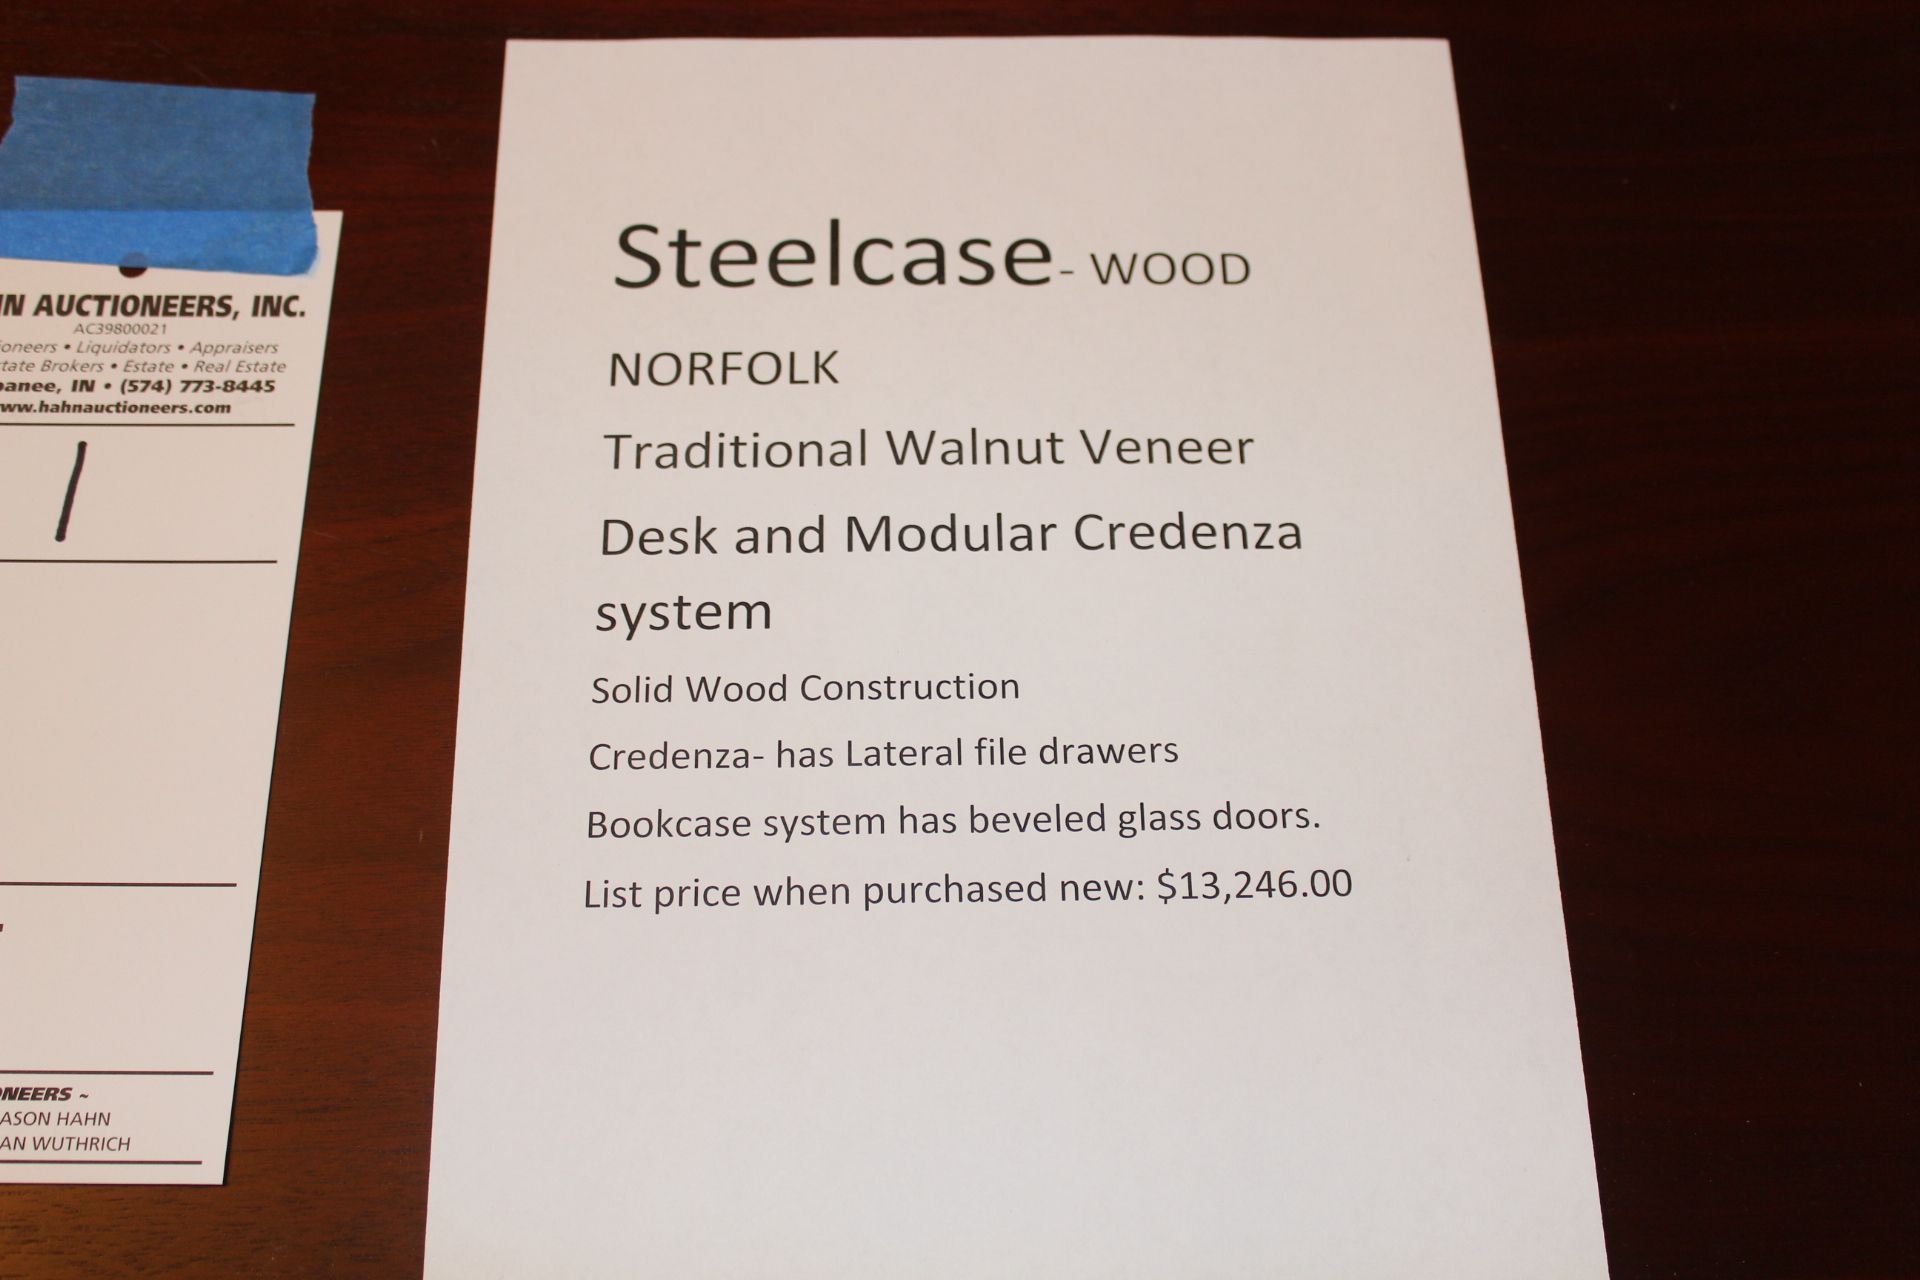 Steelcase -Wood Desk and Modular Credenza System - Image 4 of 4